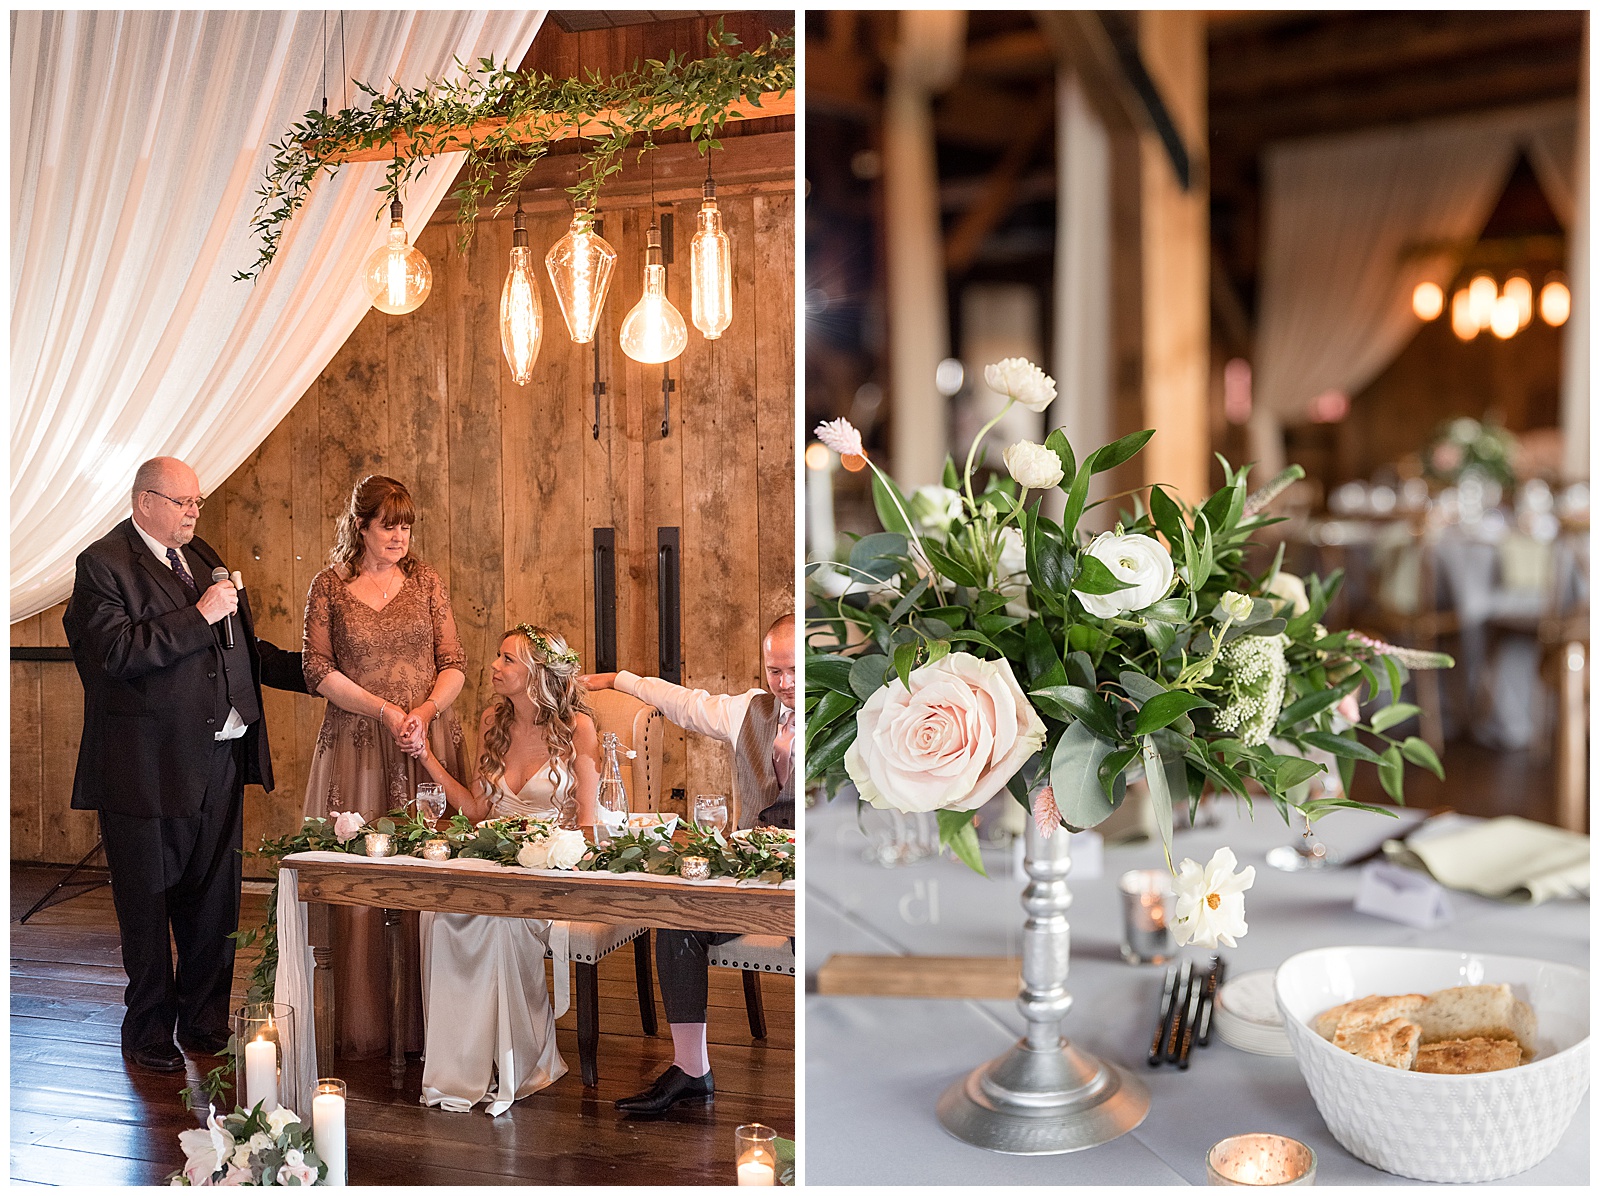 floral table displays and centerpieces show off white spring flowers and greens inside barn venue